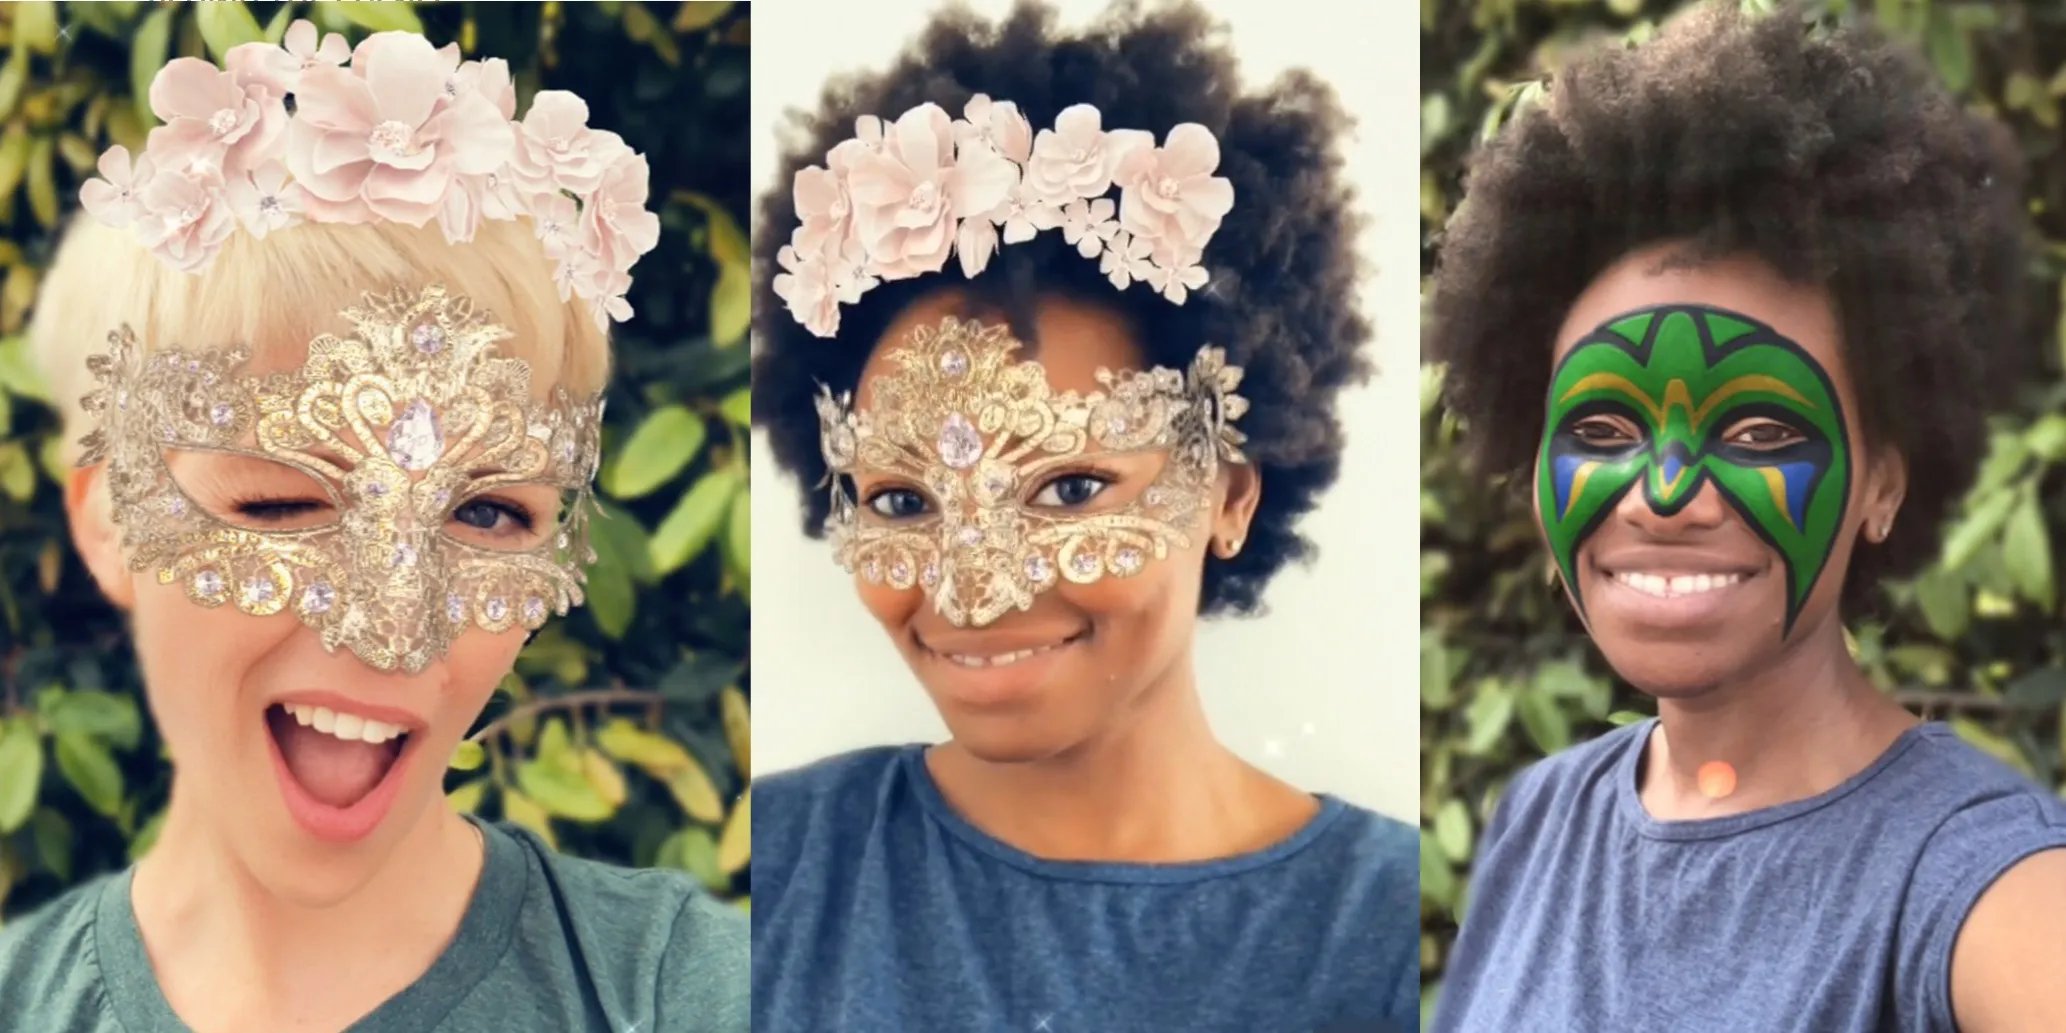 snapchat-releases-exclusive-lens-face-filters-for-the-iphone-x-using-truedepth-sensors